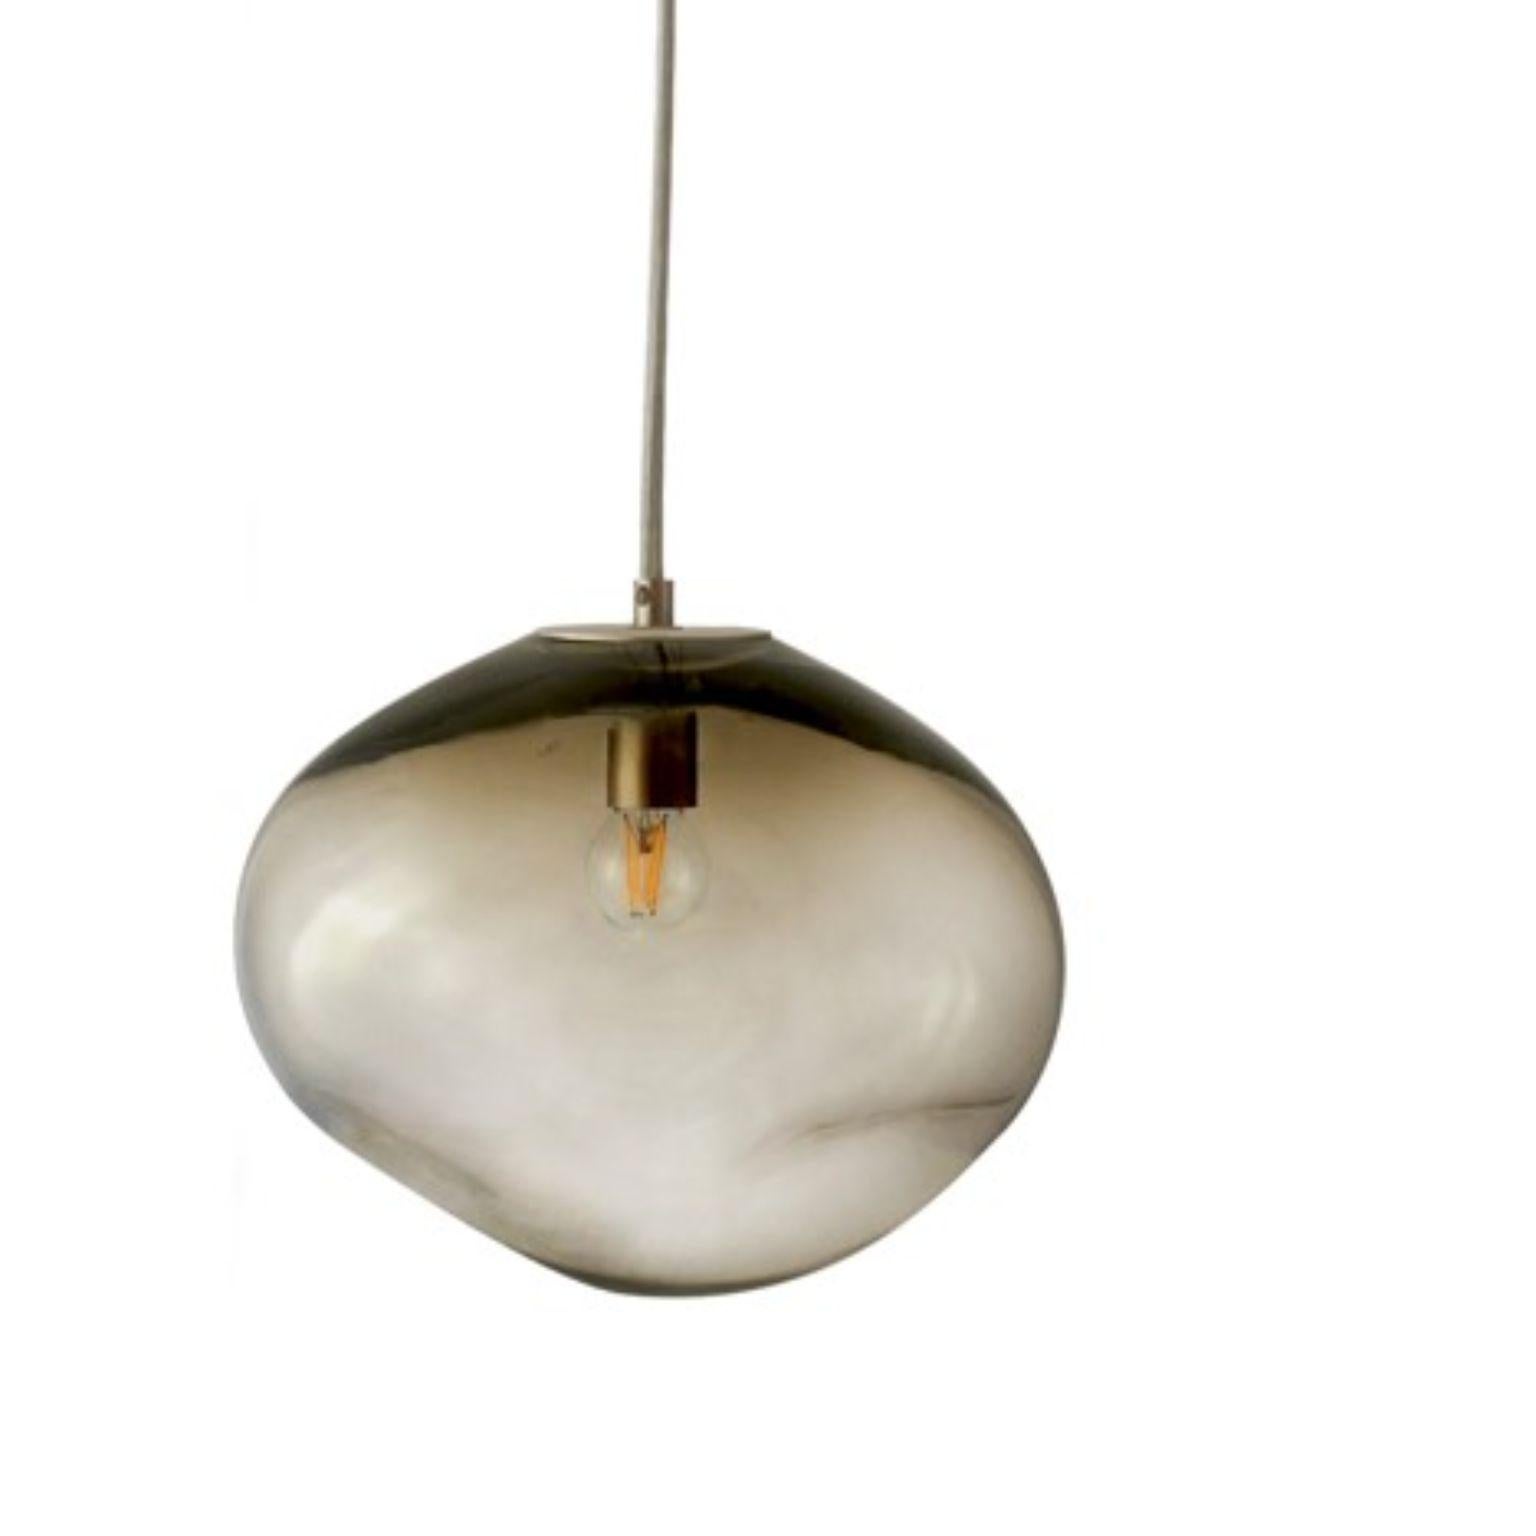 Haumea amorph silver smoke M pendant by Eloa.
No UL listed 
Material: glass, steel, silver, LED bulb.
Dimensions: D30 x W32 x H27 cm.
Also available in different colours and dimensions.

All our lamps can be wired according to each country. If sold